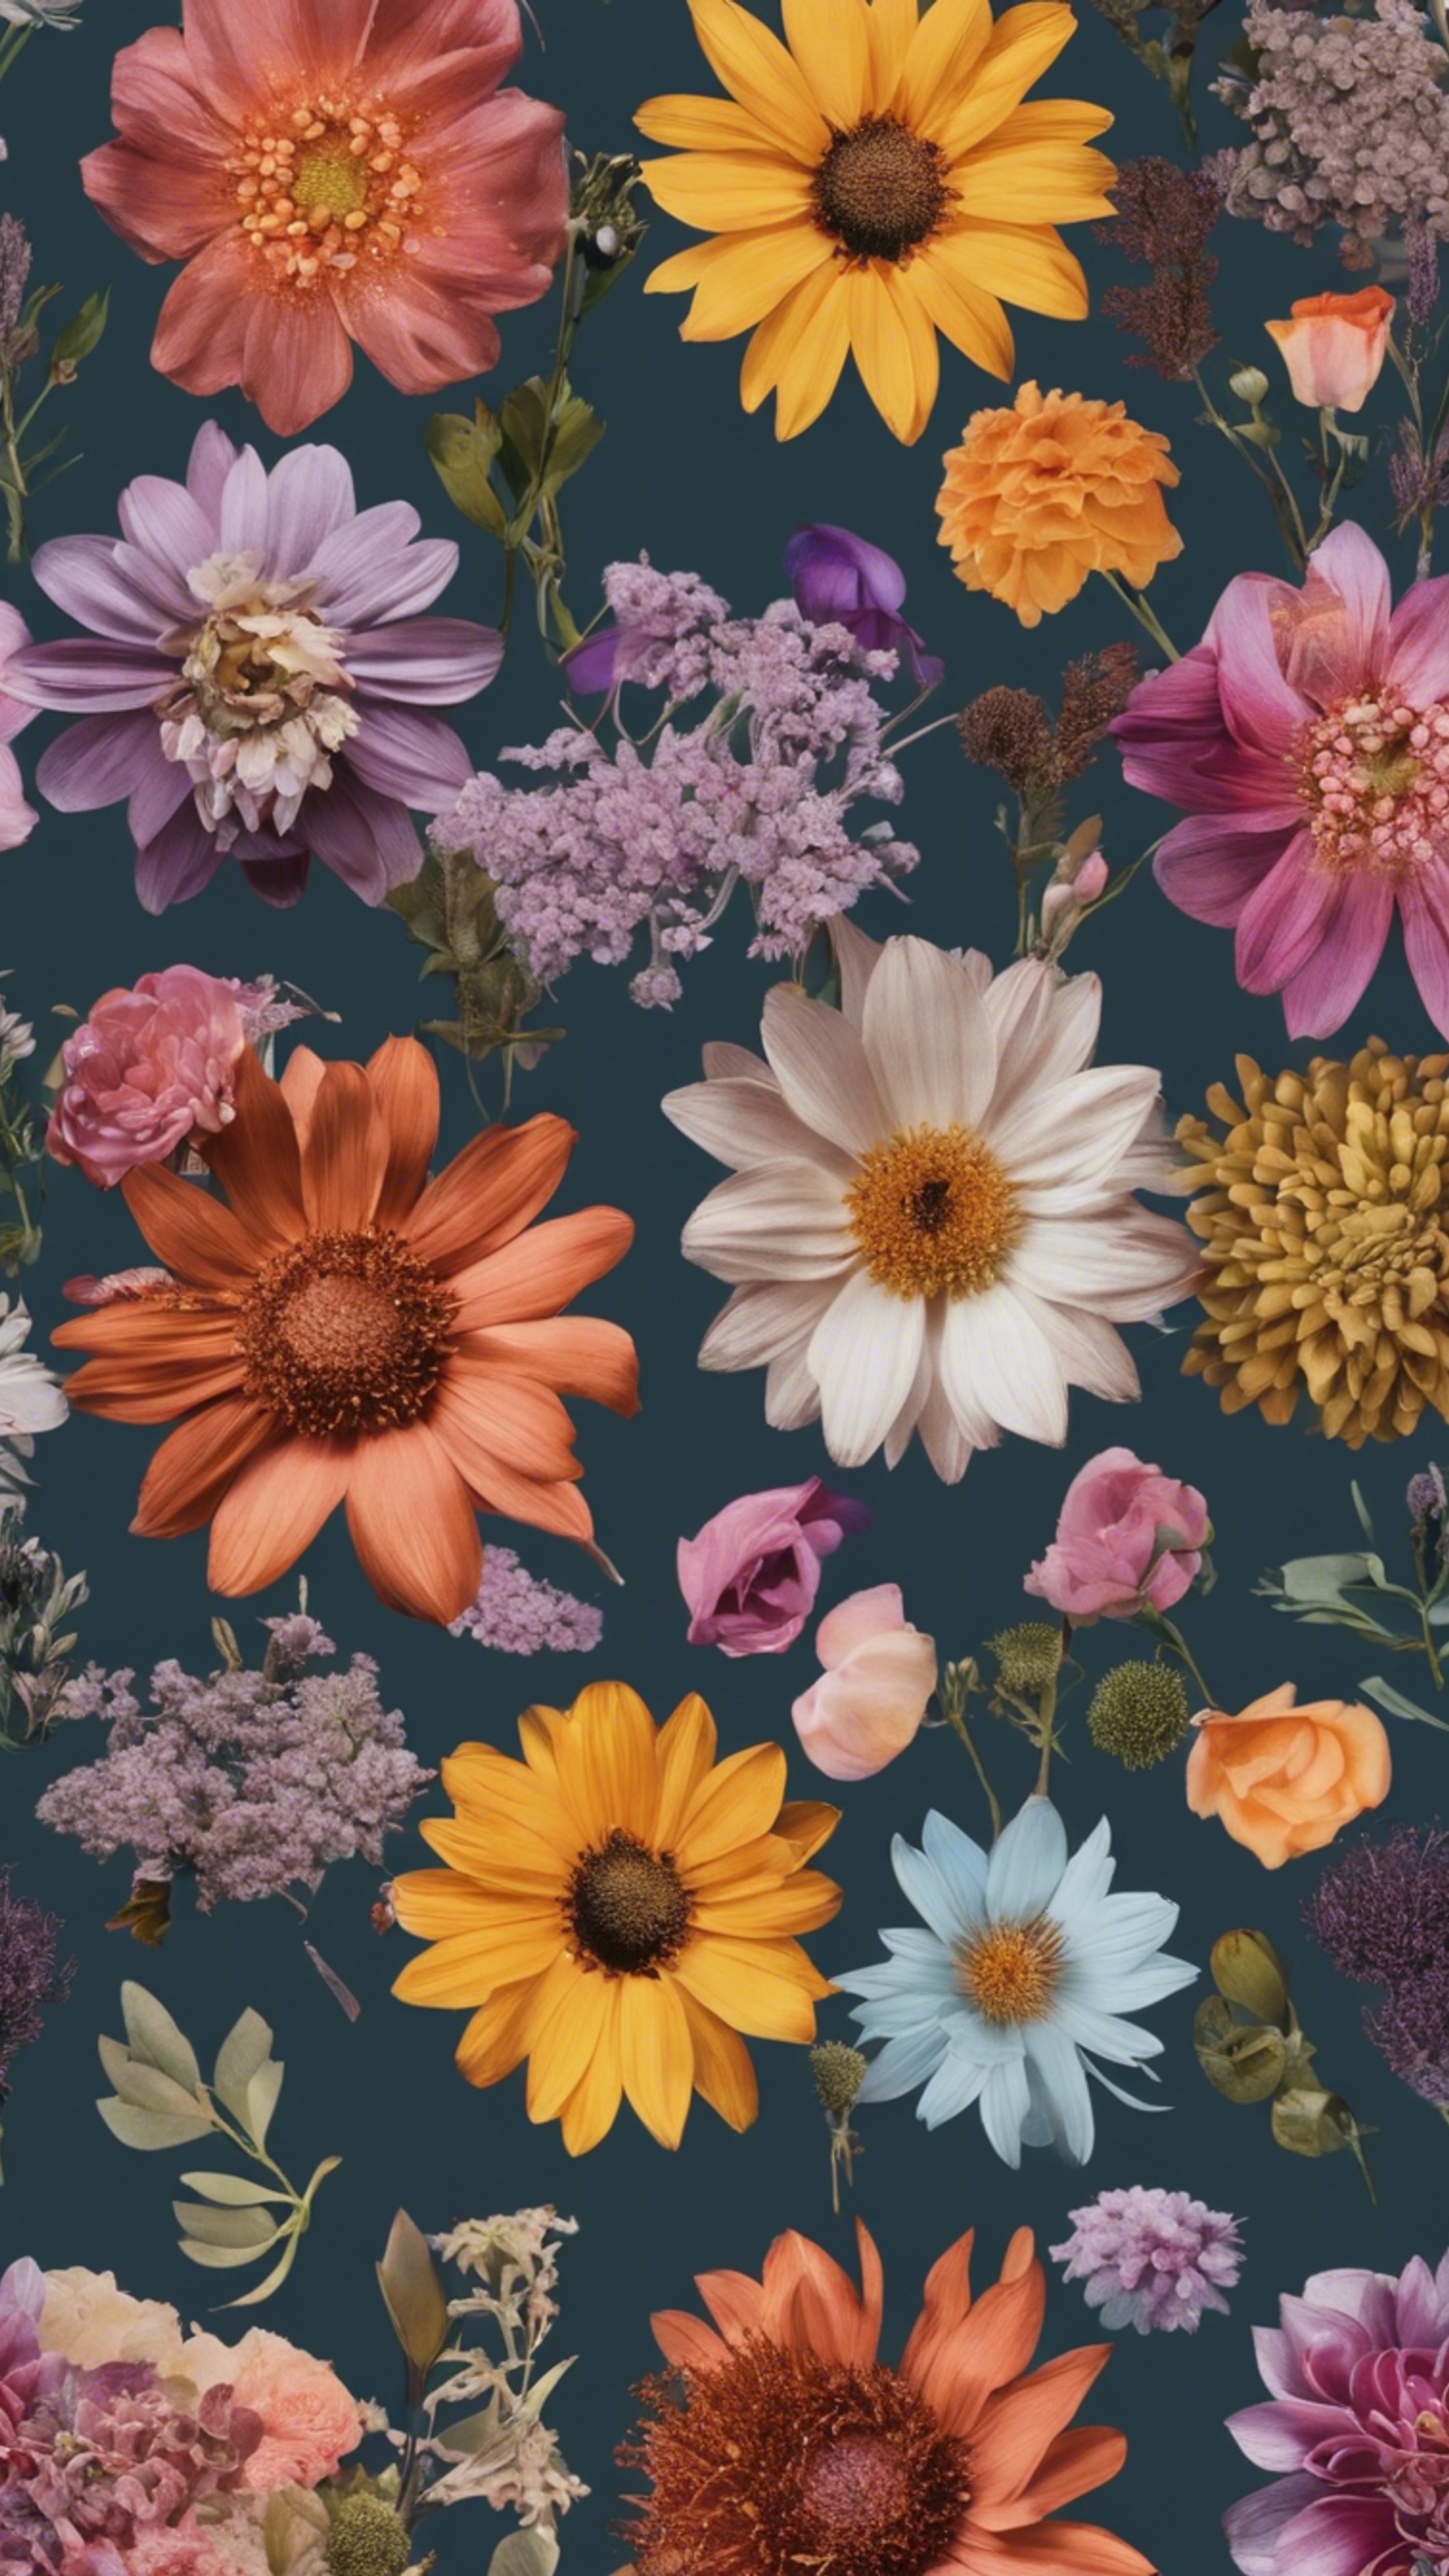 Multiple flowers of different types and colors, distinctively arranged in a bohemian floral design pattern. Валлпапер[d475d4e8f3a0489d92d5]